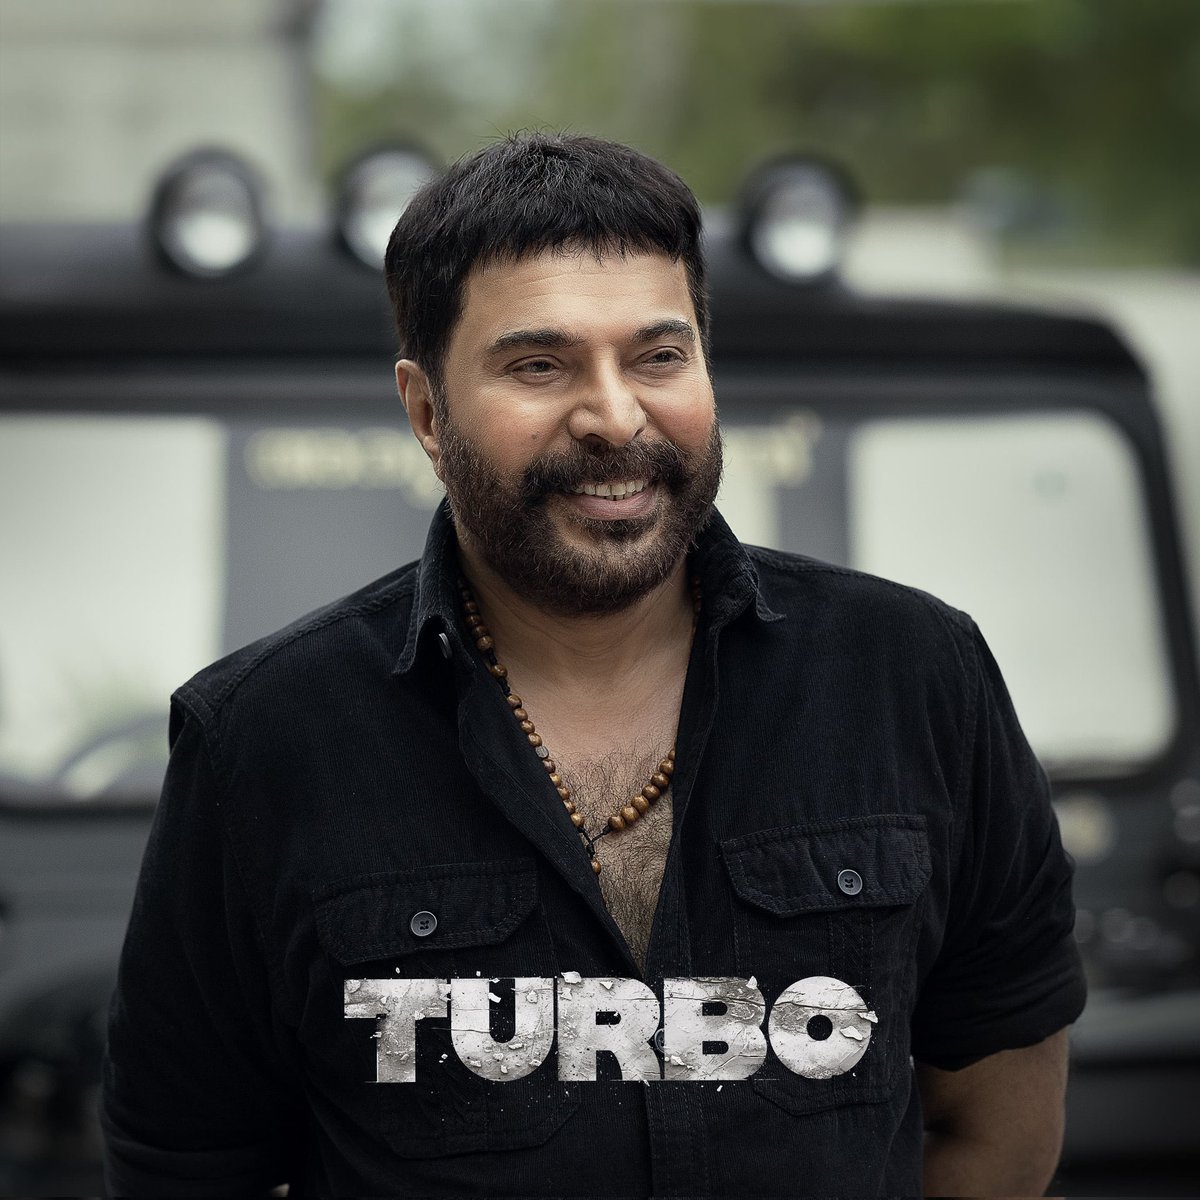 Who all are Waiting for #Turbo Trailer ??!! 🔥 Official Trailer Releasing Tomorrow at 7.30 PM UAE Time #Mammootty #MammoottyKampany #TurboMovie @mammukka @TurboTheFilm @Truthglobalofcl